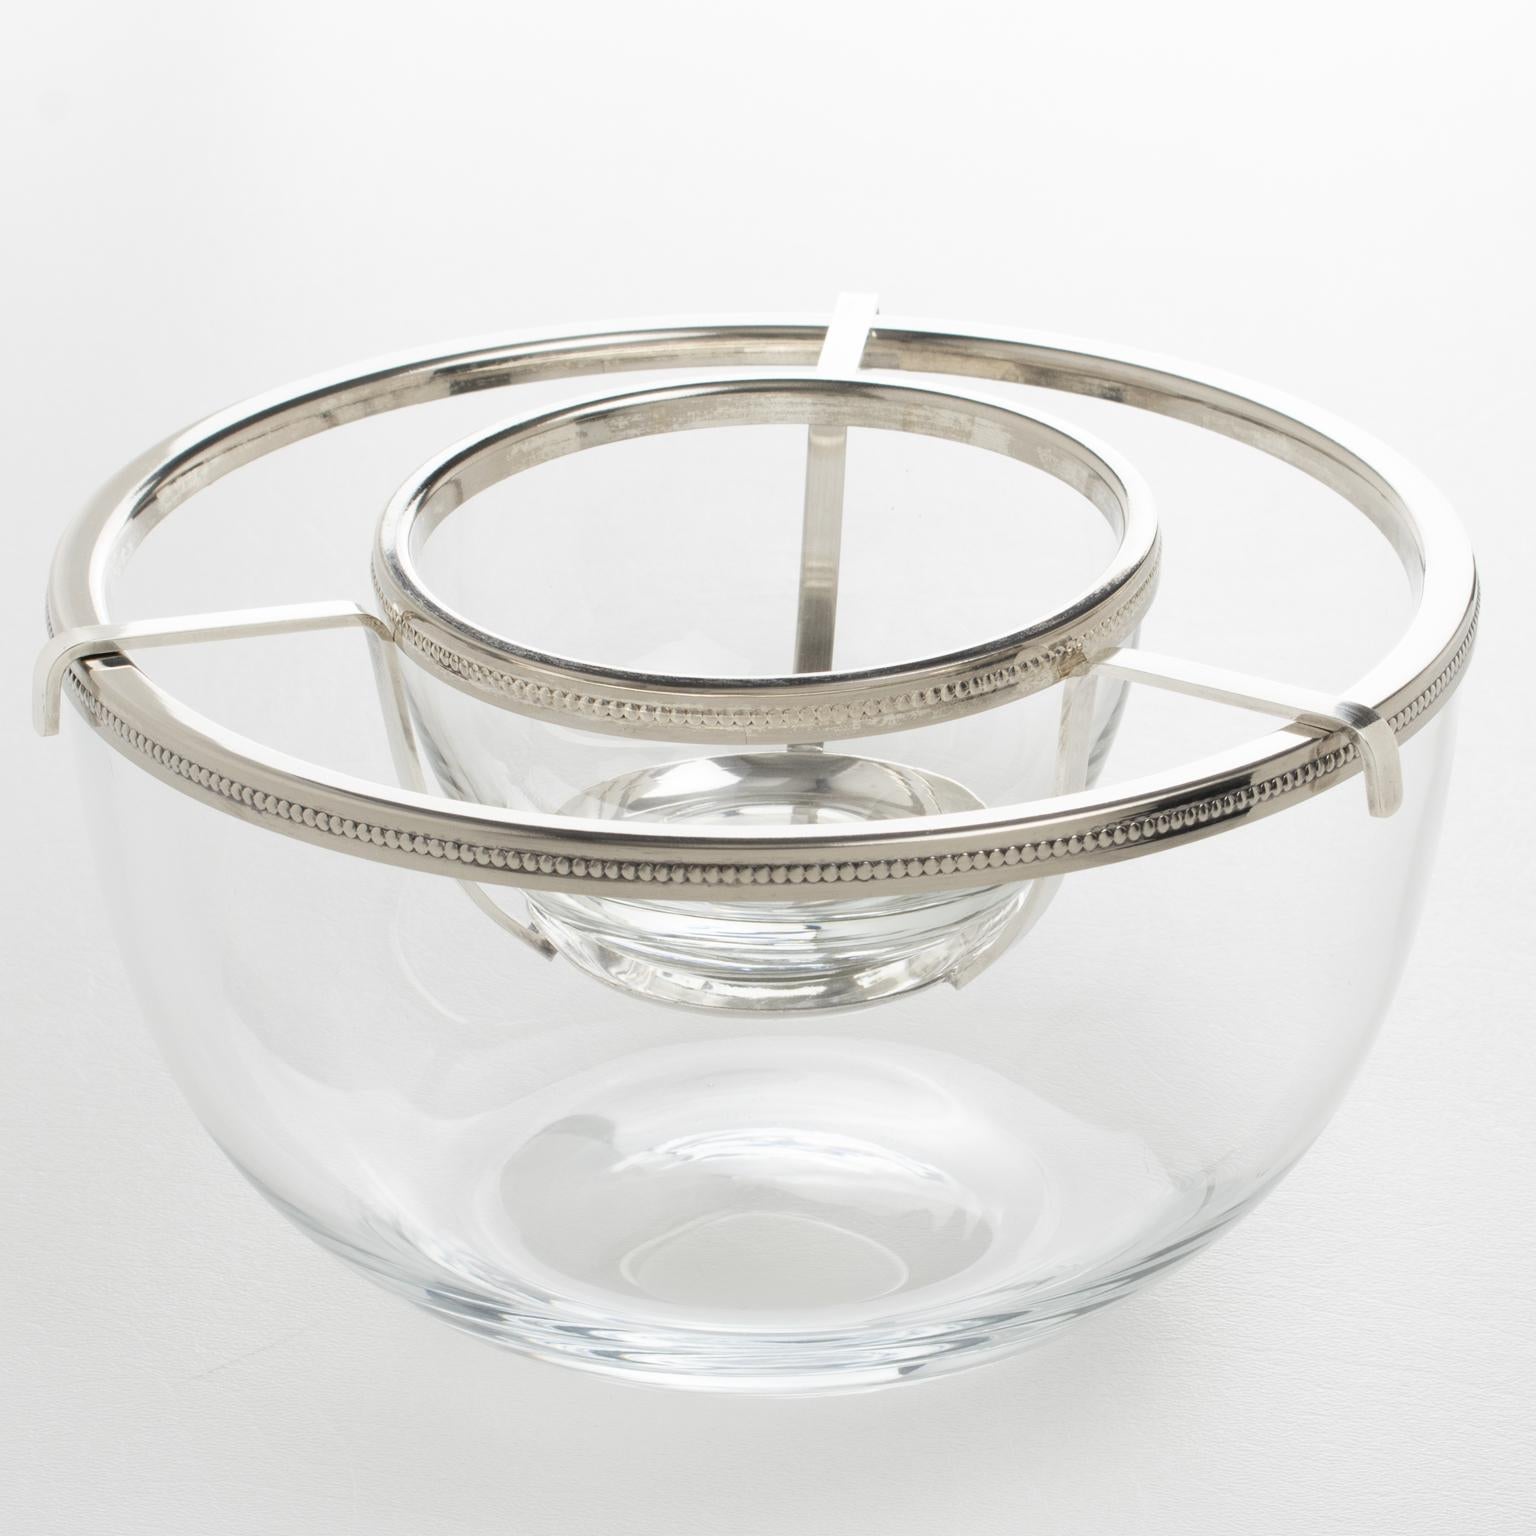 The French silversmith AMO designed this stylish modernist Mid-Century silver plate and crystal caviar serving bowl in the 1970s. The streamlined chic design of this dish chiller has a rounded shape, featuring a large crystal container with a